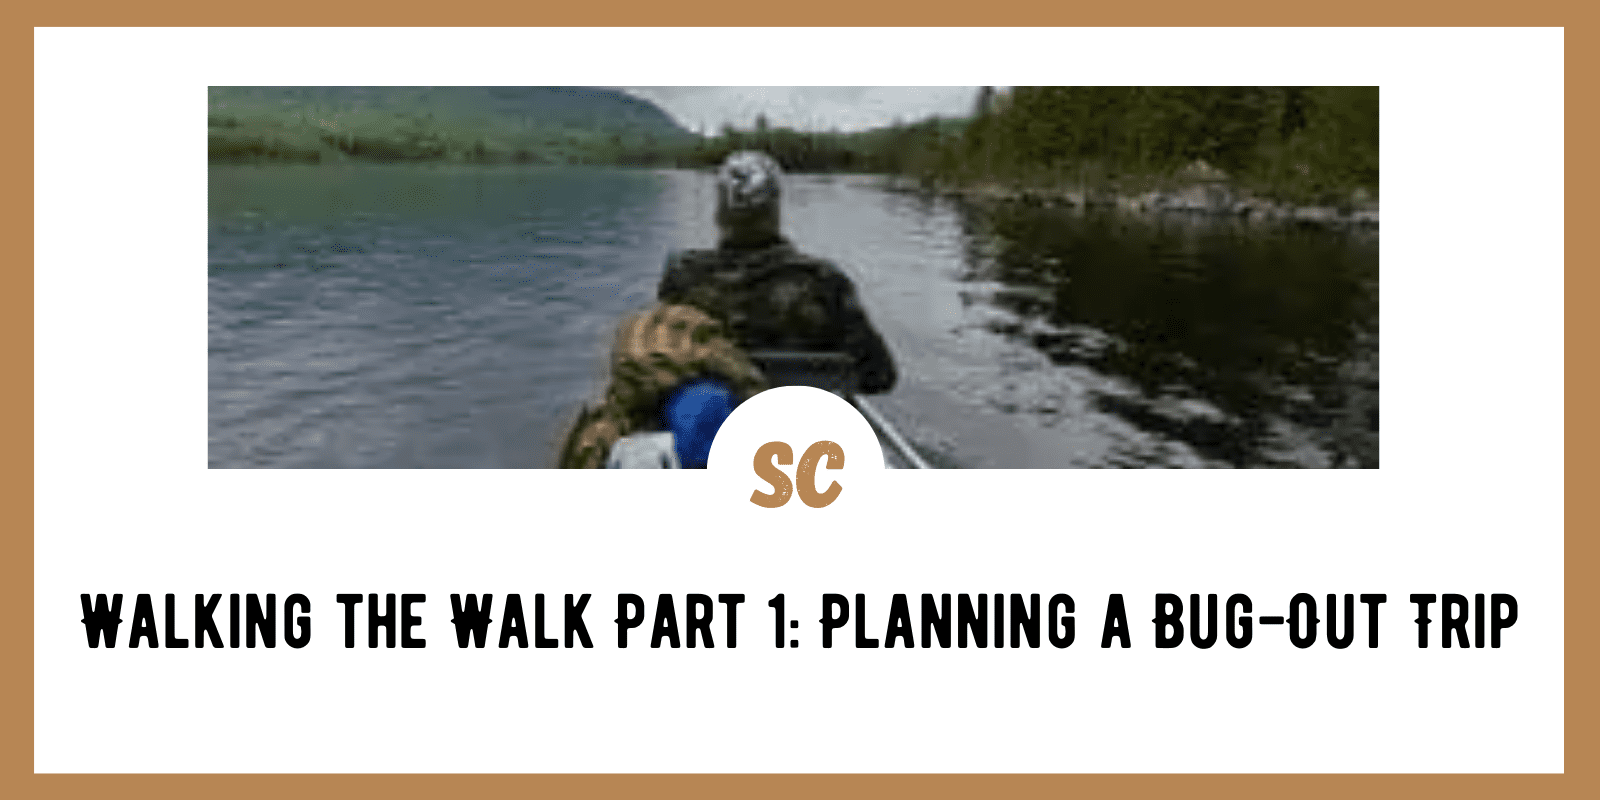 Walking the Walk Part 1: Planning a Bug-Out Trip